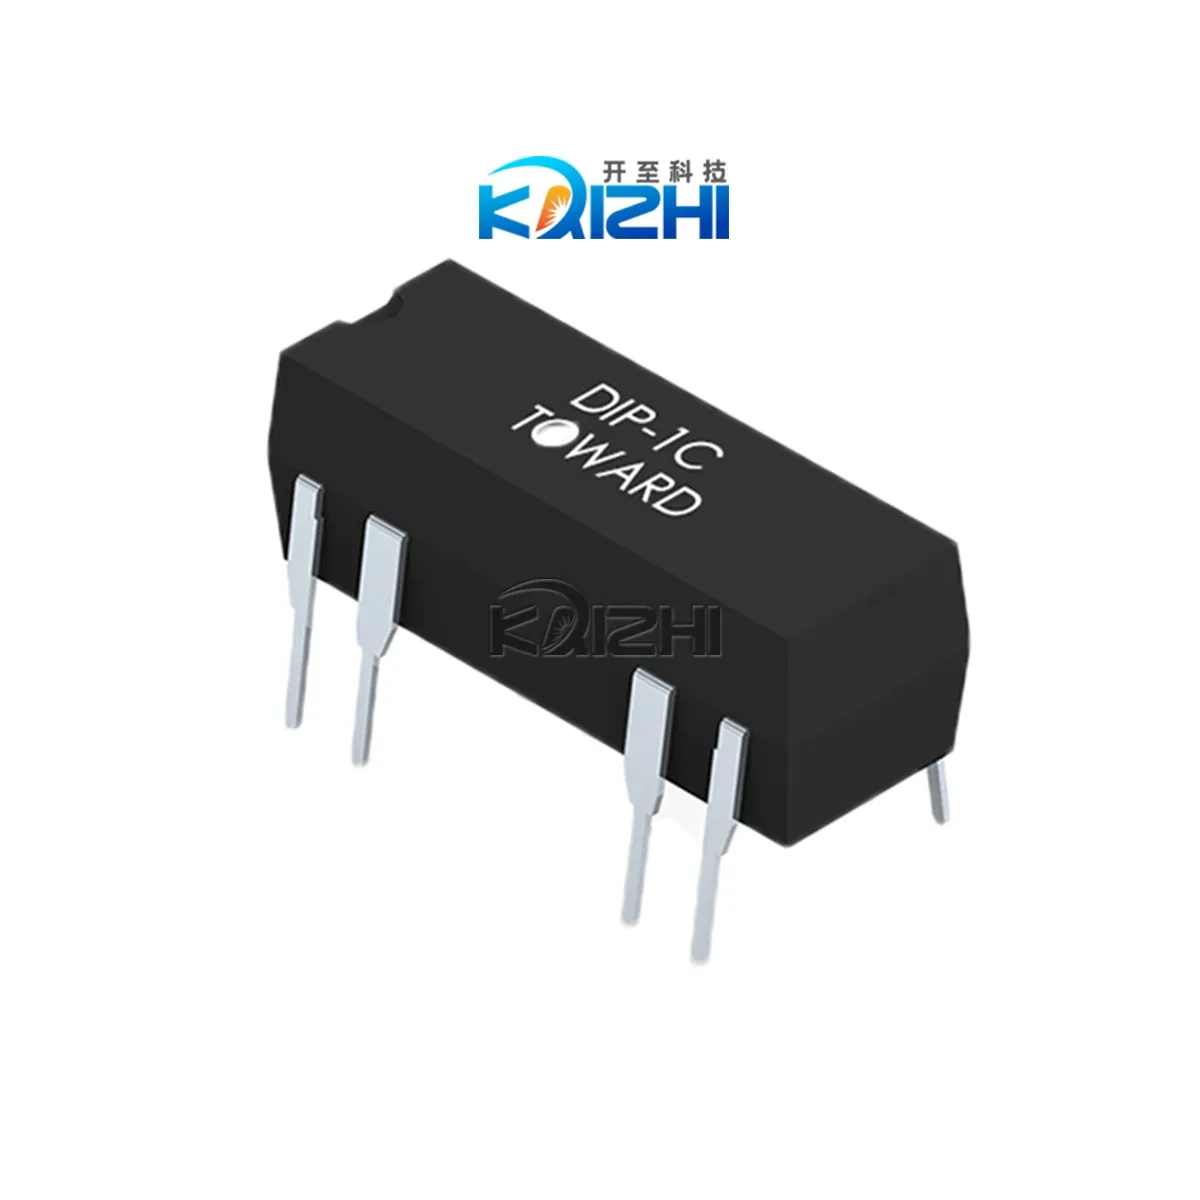 IN STOCK ORIGINAL BRAND 200V/0.5A REED RELAY, 1 FORM C, DIP-1C05D